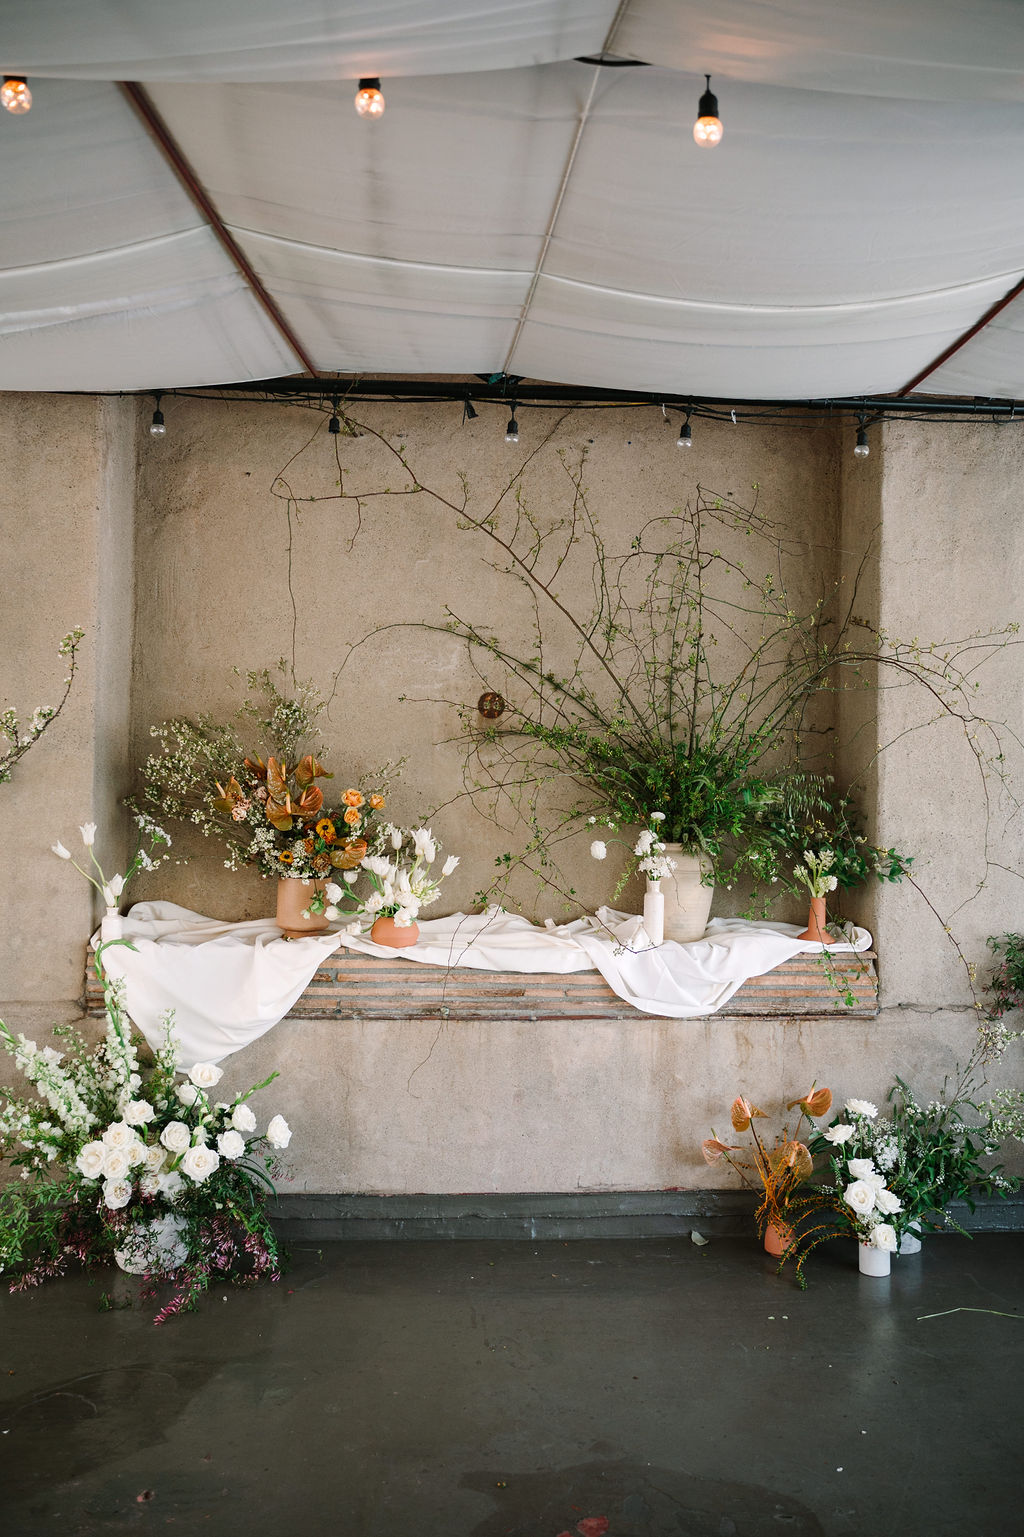 stone grand wedding vases dogwood wedding arrangements clean white florals with forest greens and pops of orange
white draped balcony wedding ceremony organic greens wedding ceremony unique alter ideas ethereal whimsical delicate greenery unique ceremony locations berkeley city club